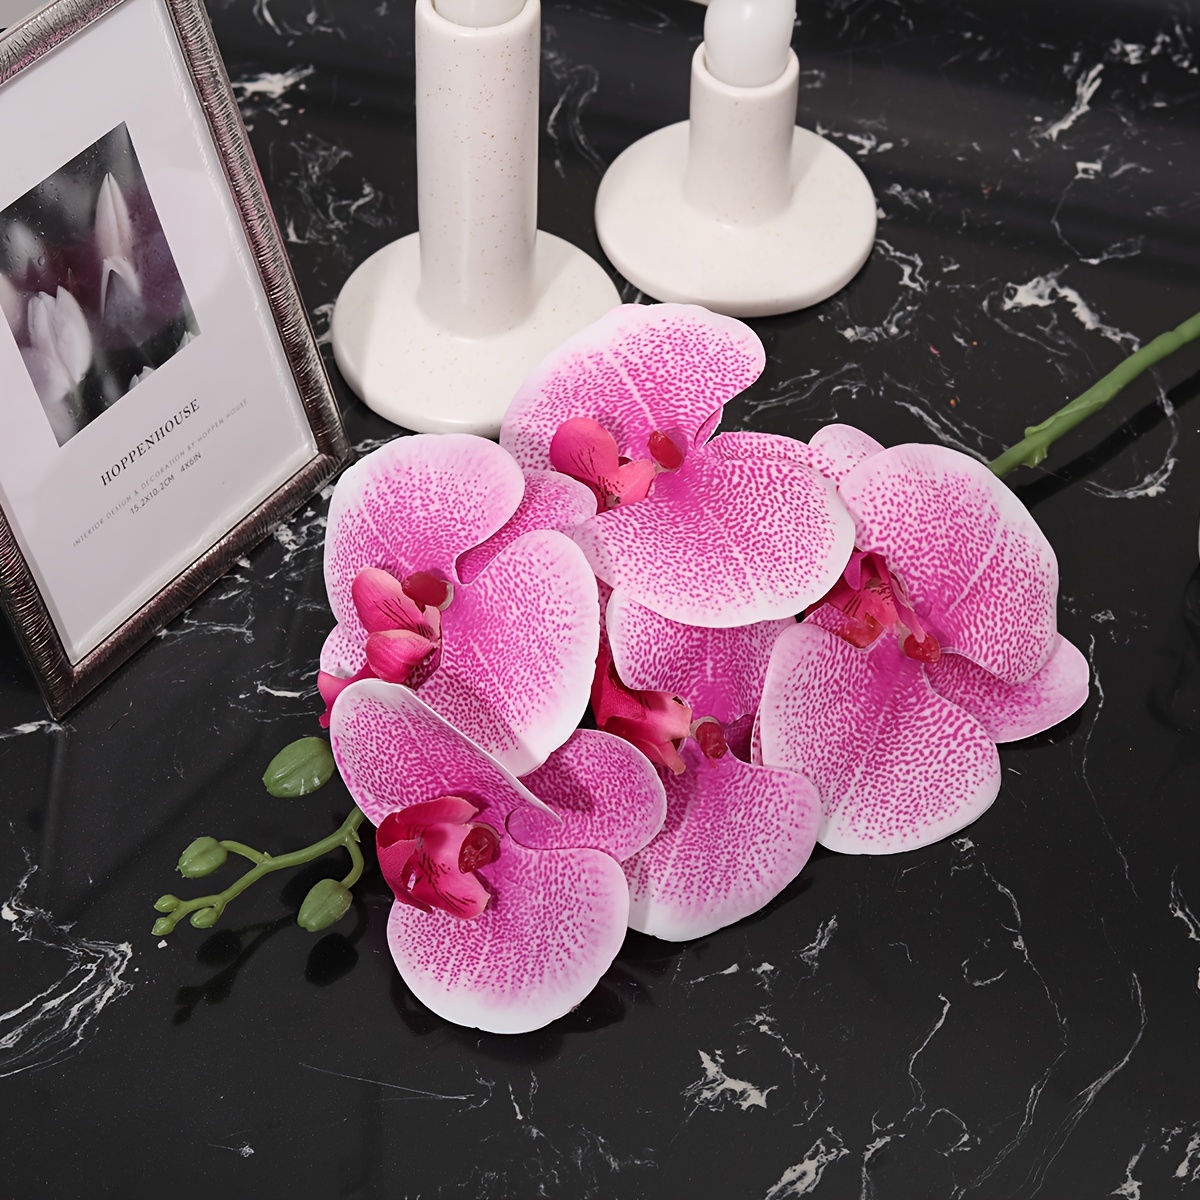 white and pink orchid flowers